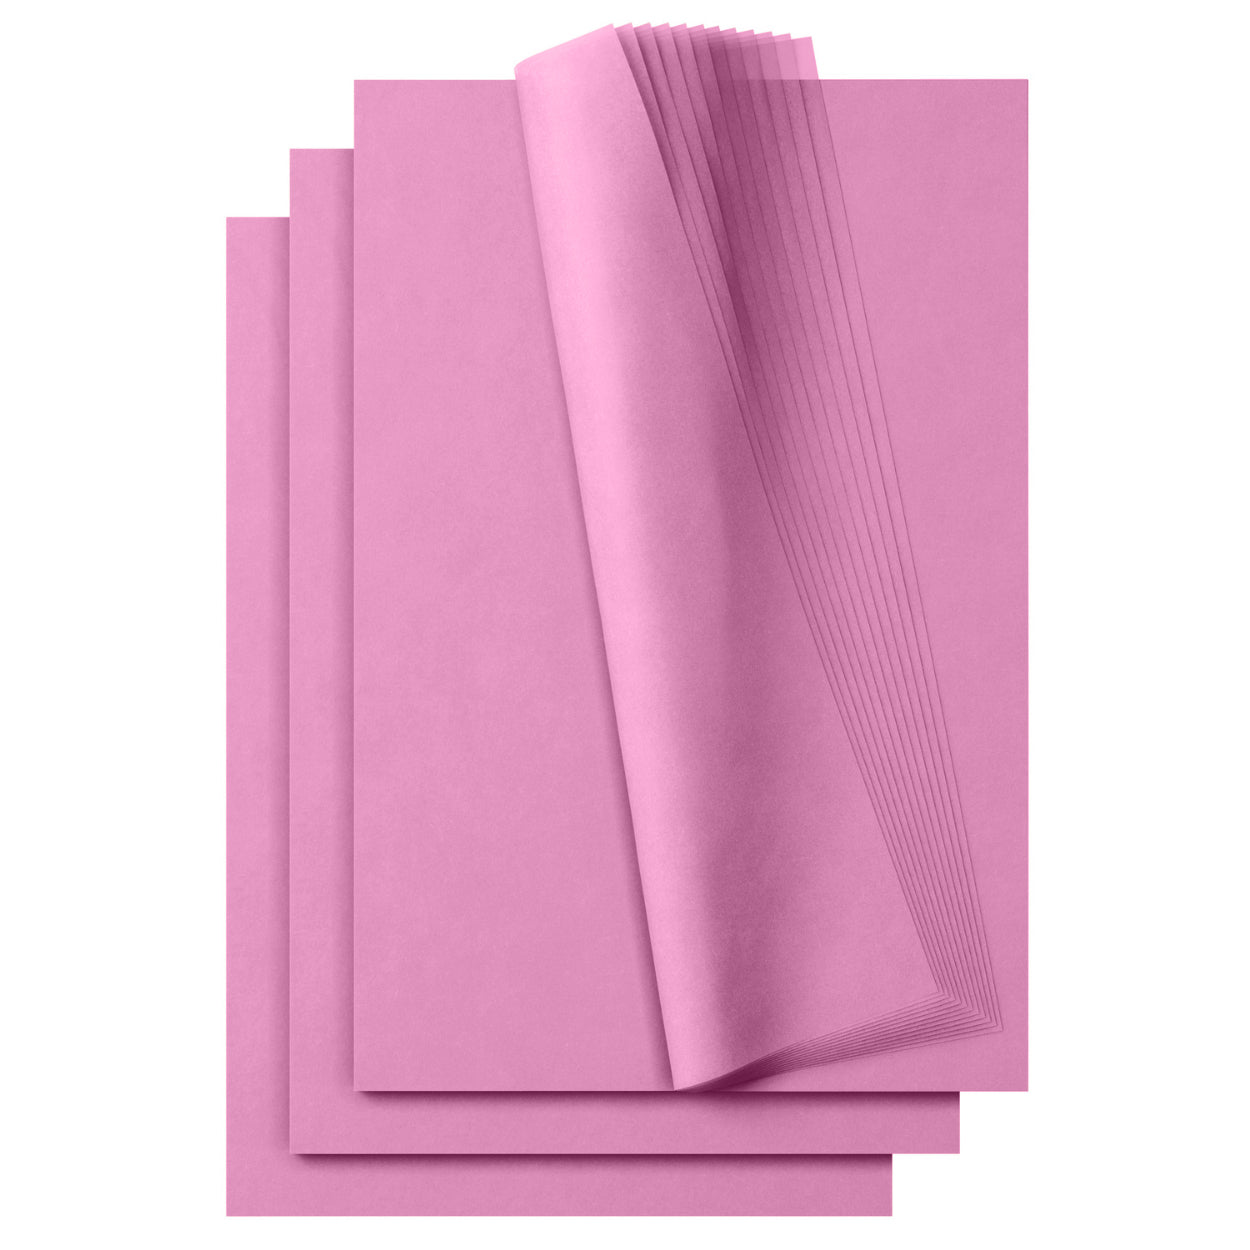 Lavex 20 x 30 10# Bright Pink Tissue Paper Sheets - 480/Pack